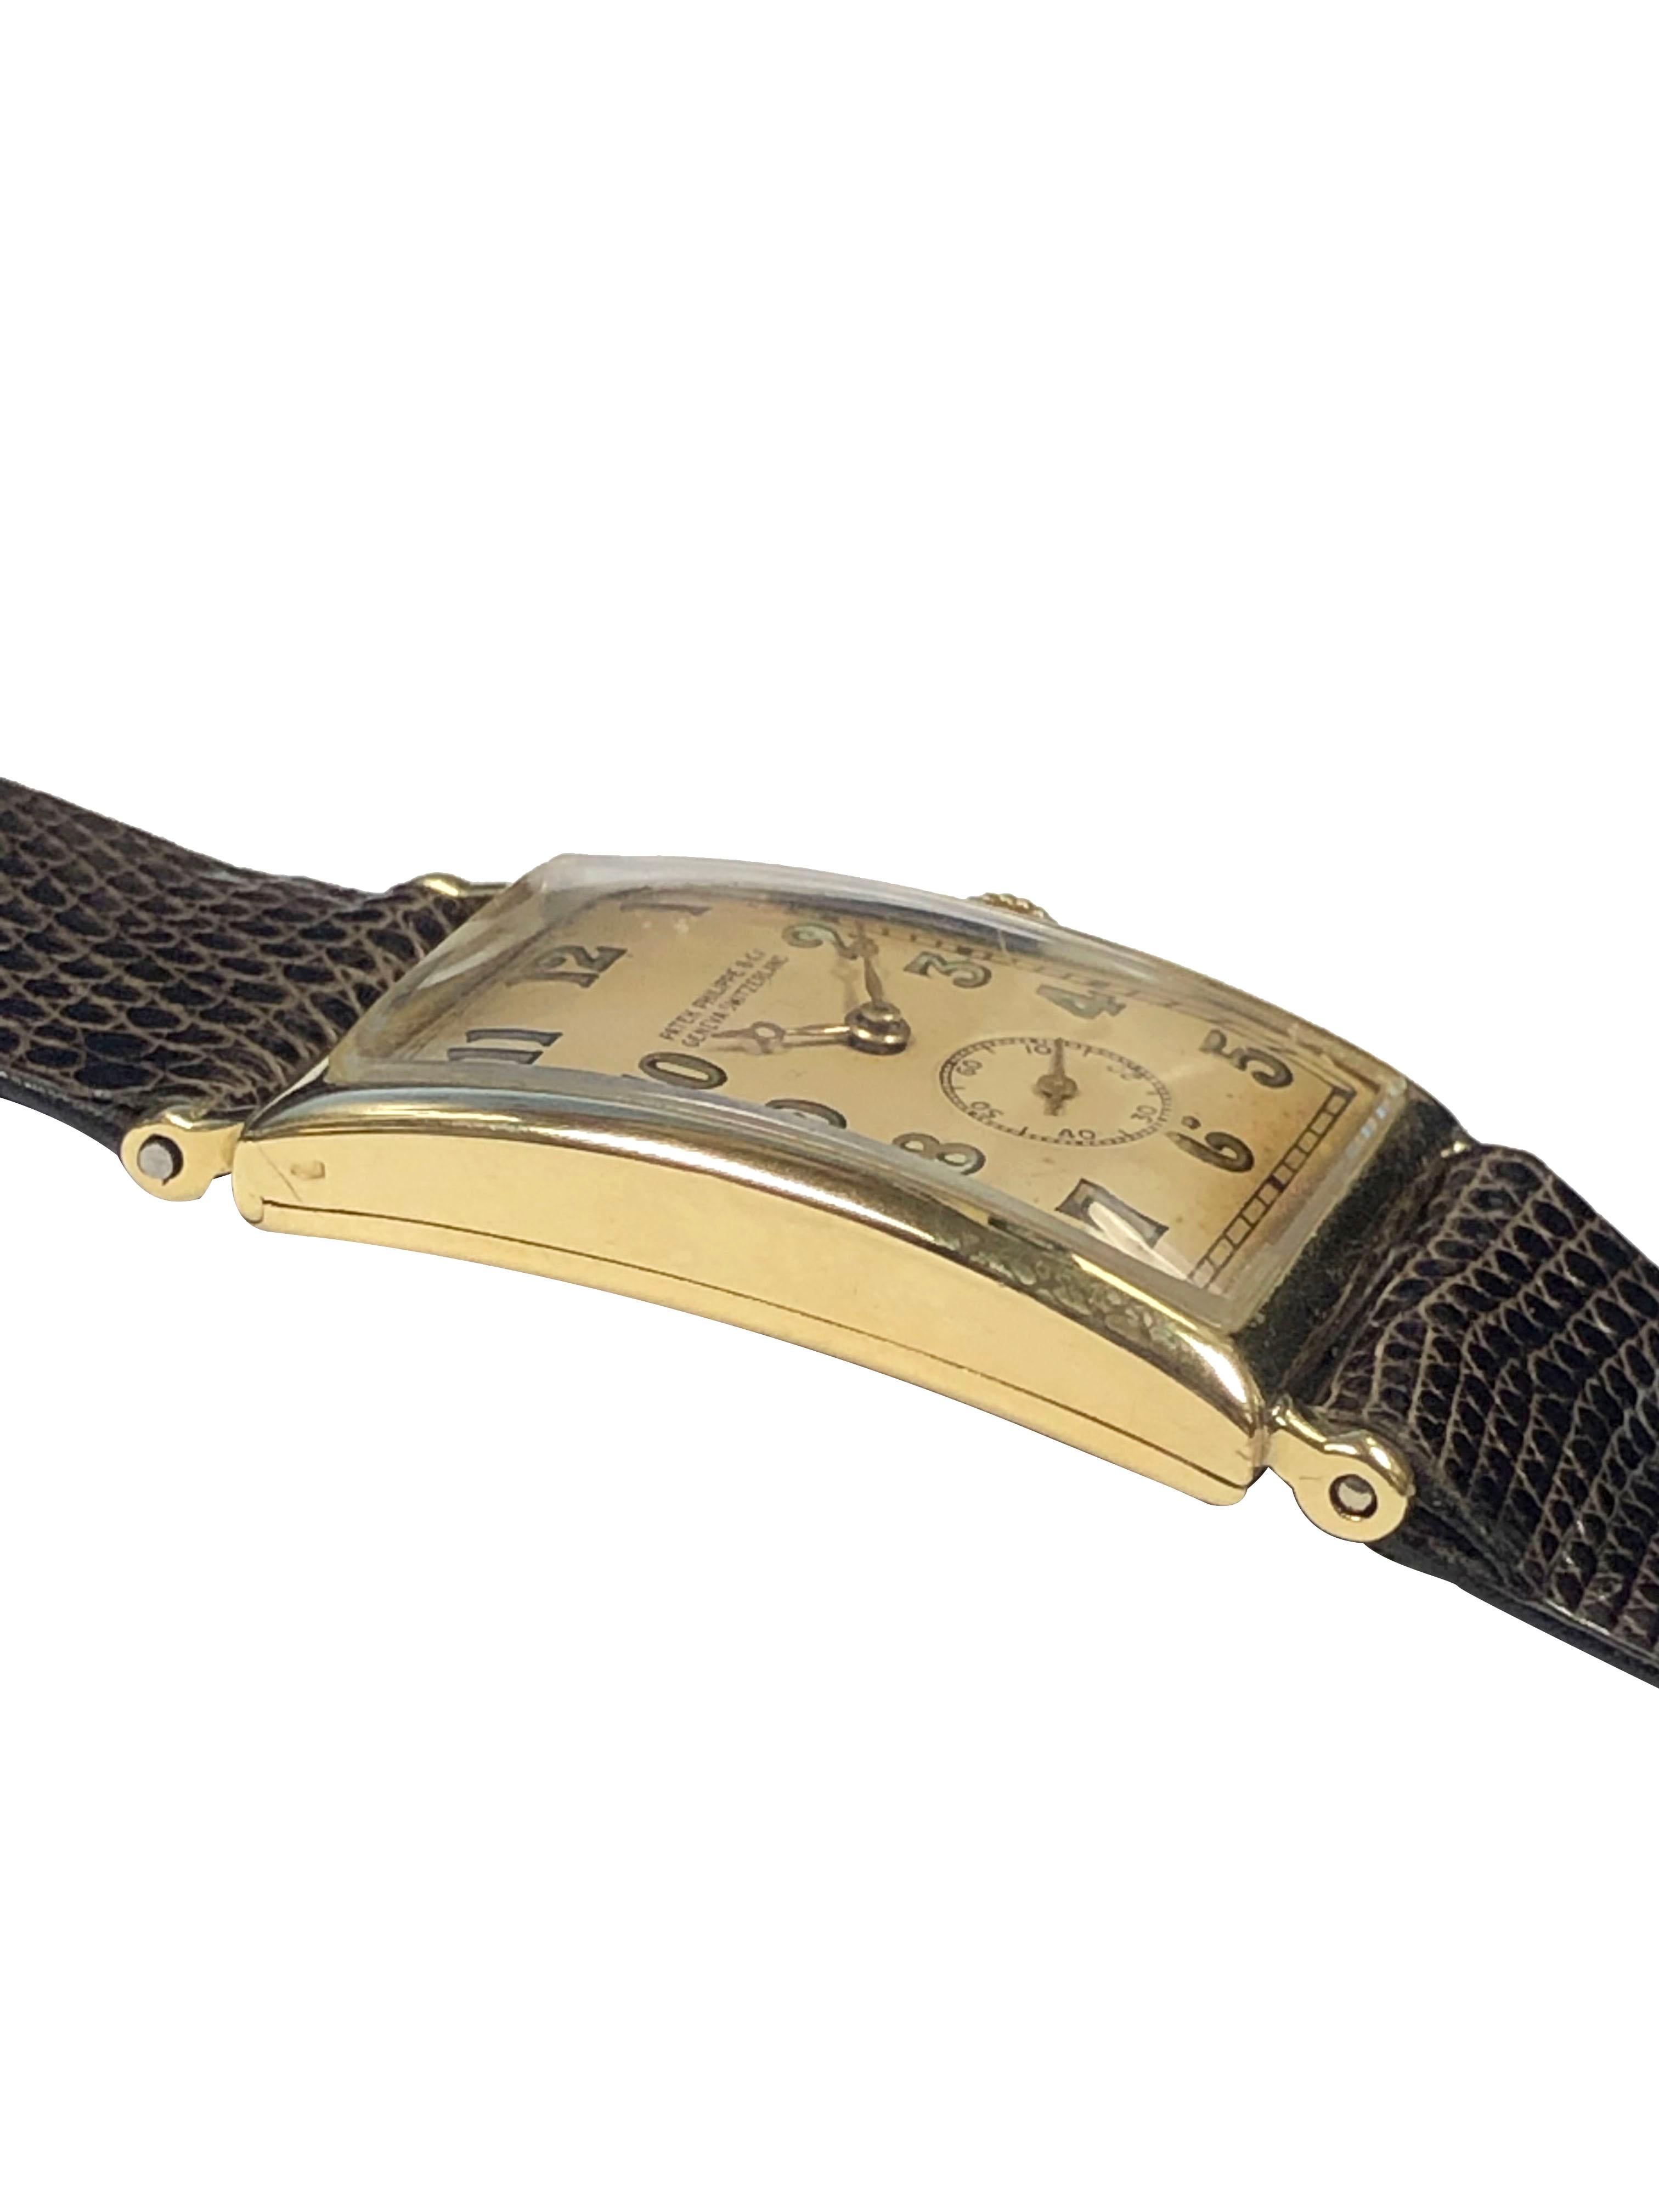 Circa 1920s Patek Philippe Reference 10 Wrist Watch, 33 x 23 M.M. slightly curved 2 piece hinged back case.  18 Jewel Mechanical, manual wind nickle lever movement. Original off white matt finished dial with applied Arabic numerals, sub seconds